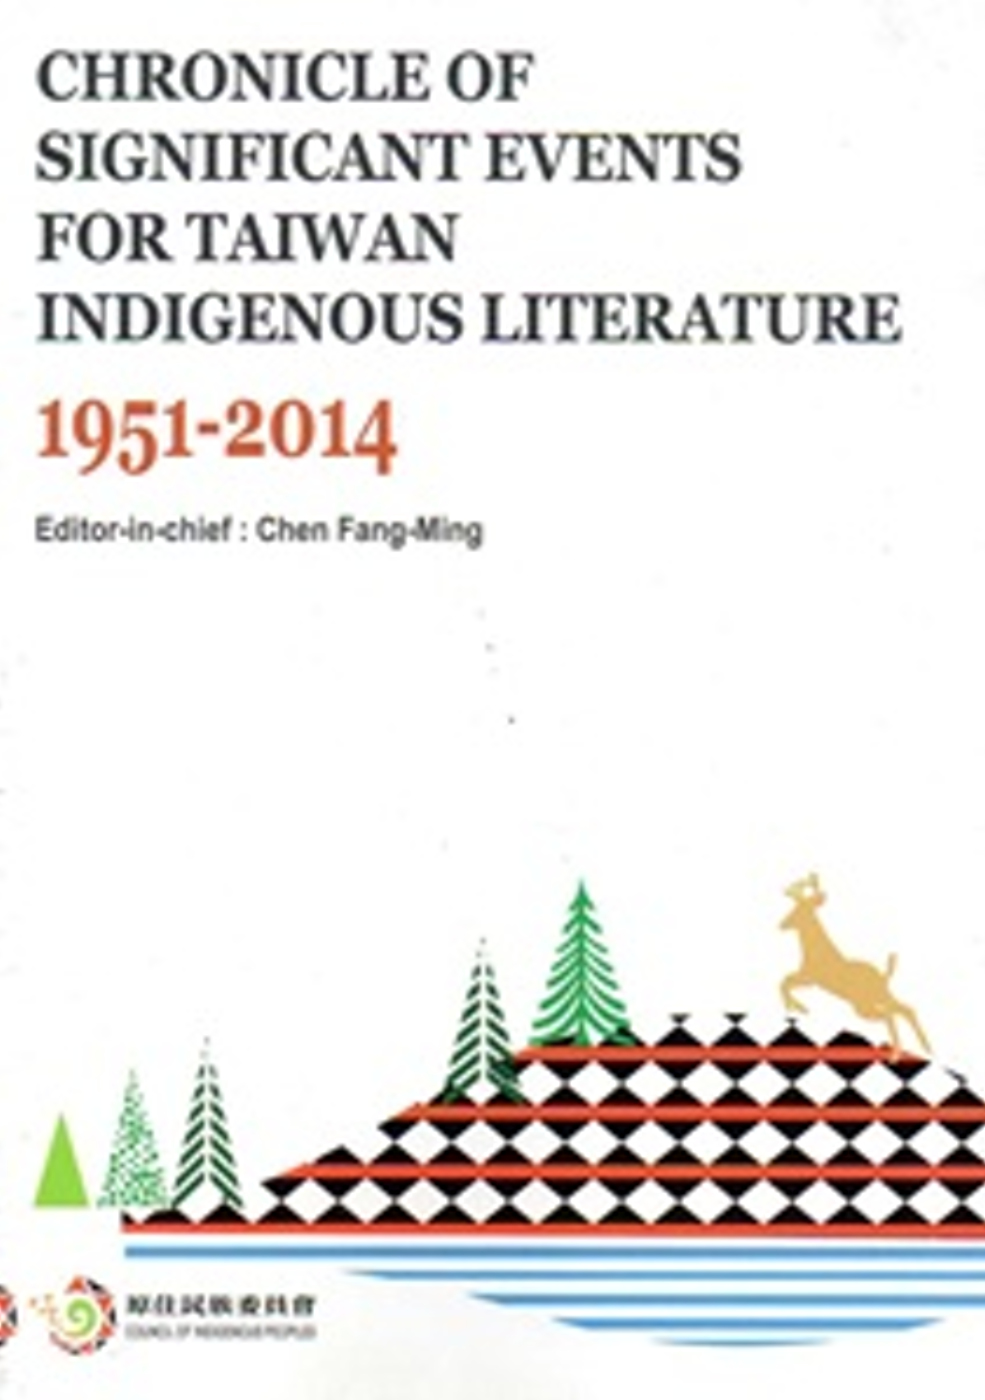 CHRONICLE OF SIGNIFICANT EVENTS FOR TAIWAN INDIGENOUS LITERTURE 1951-2014